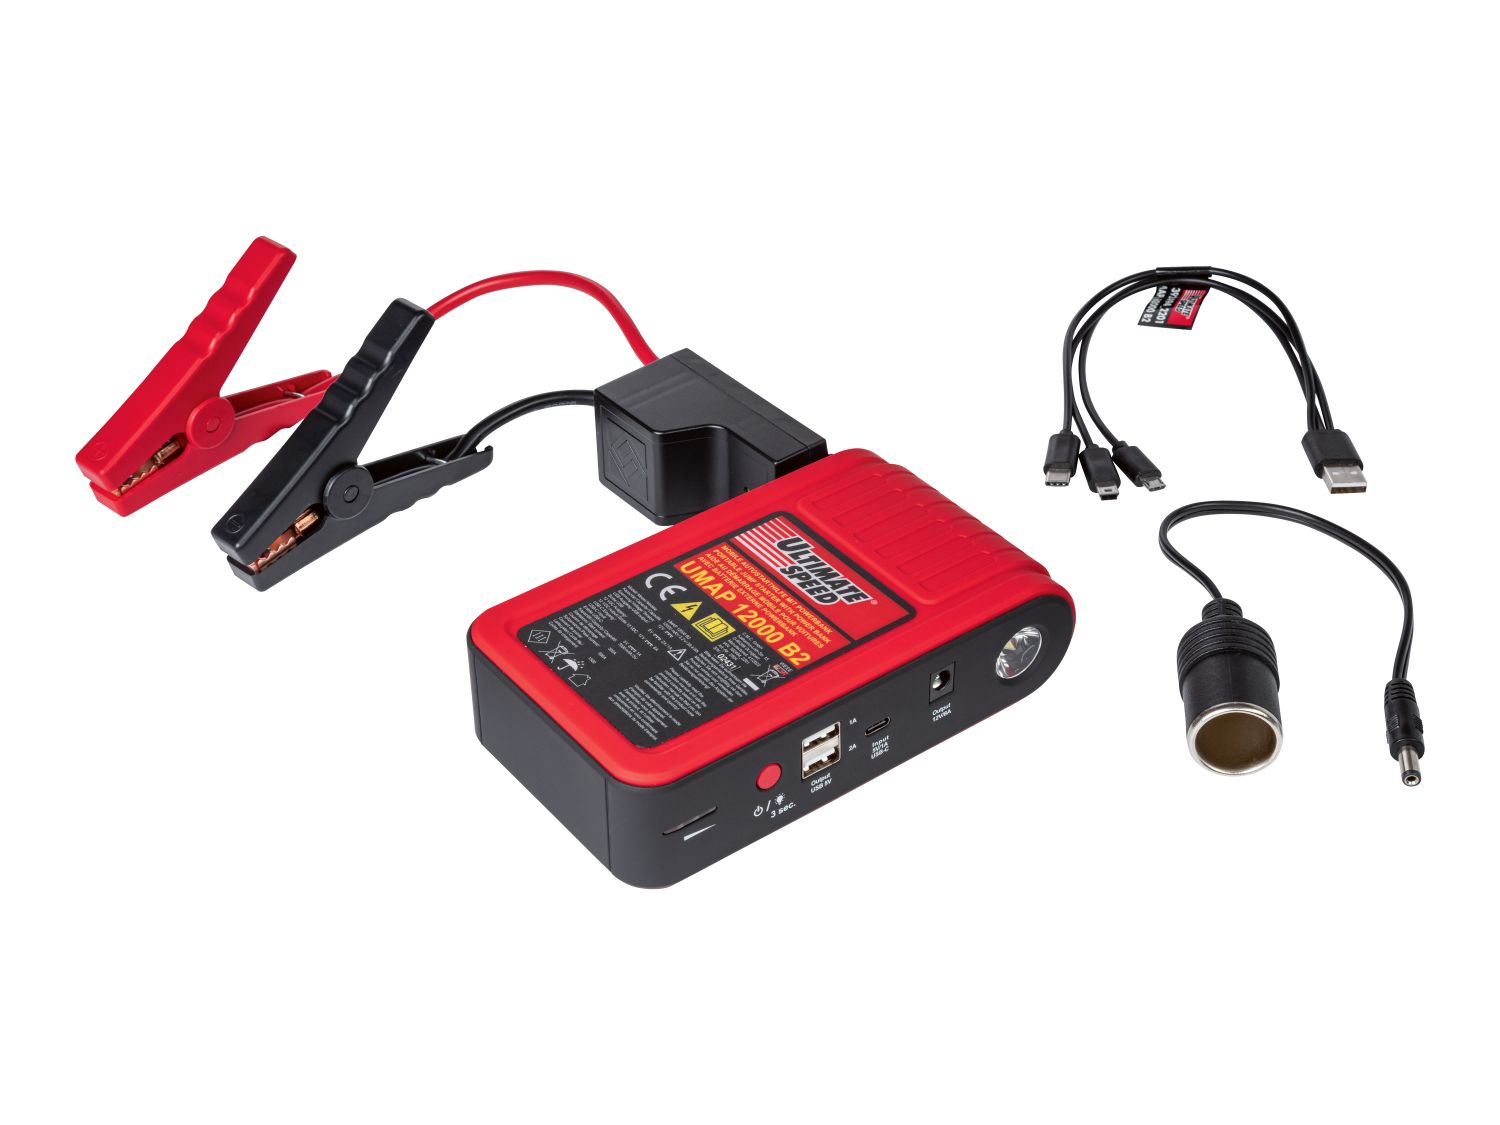 Ultimate Speed Portable Jump Starter with Power Bank 